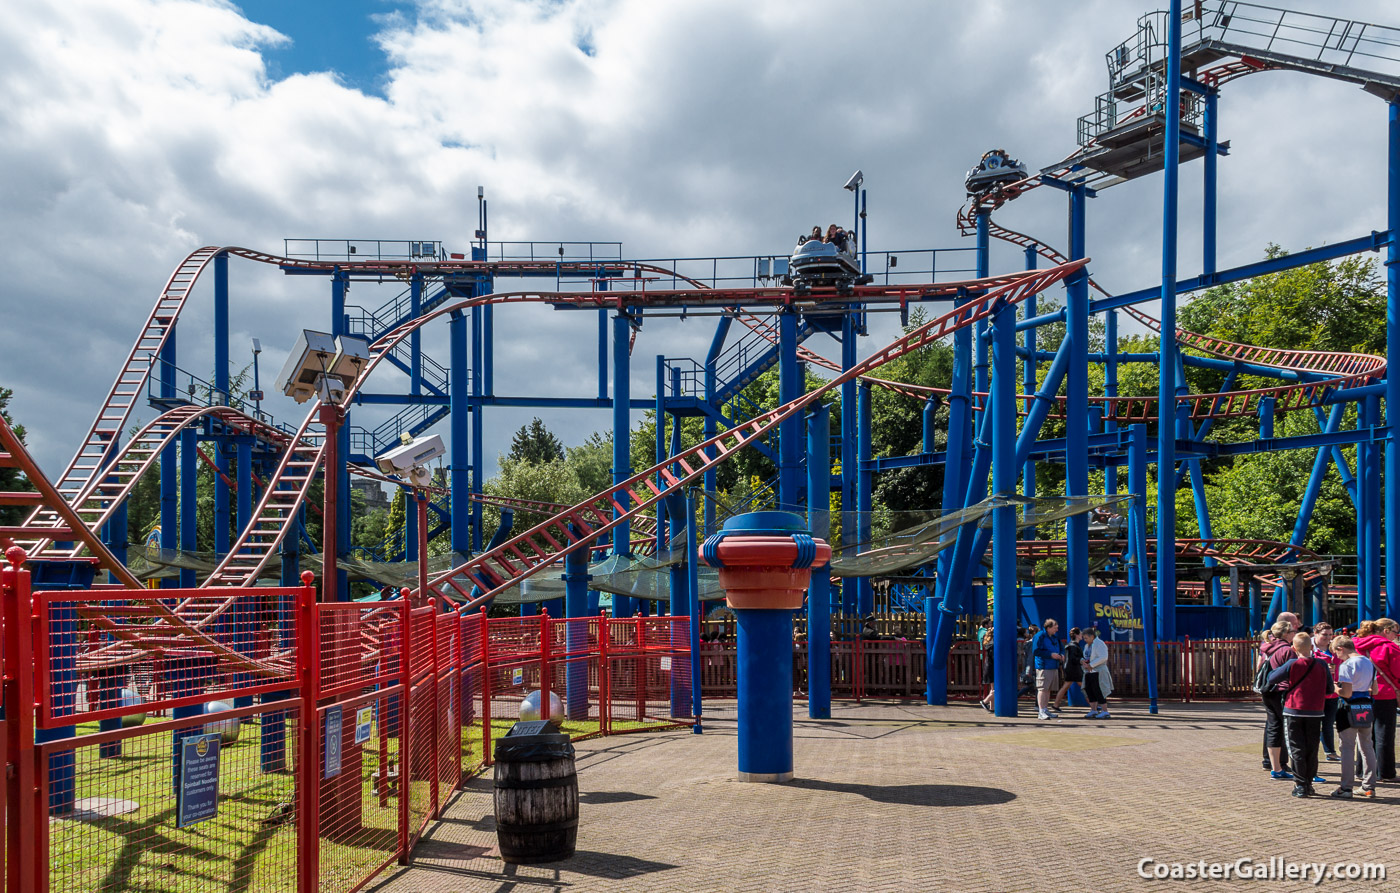 Pictures of the Spinball Whizzer ride